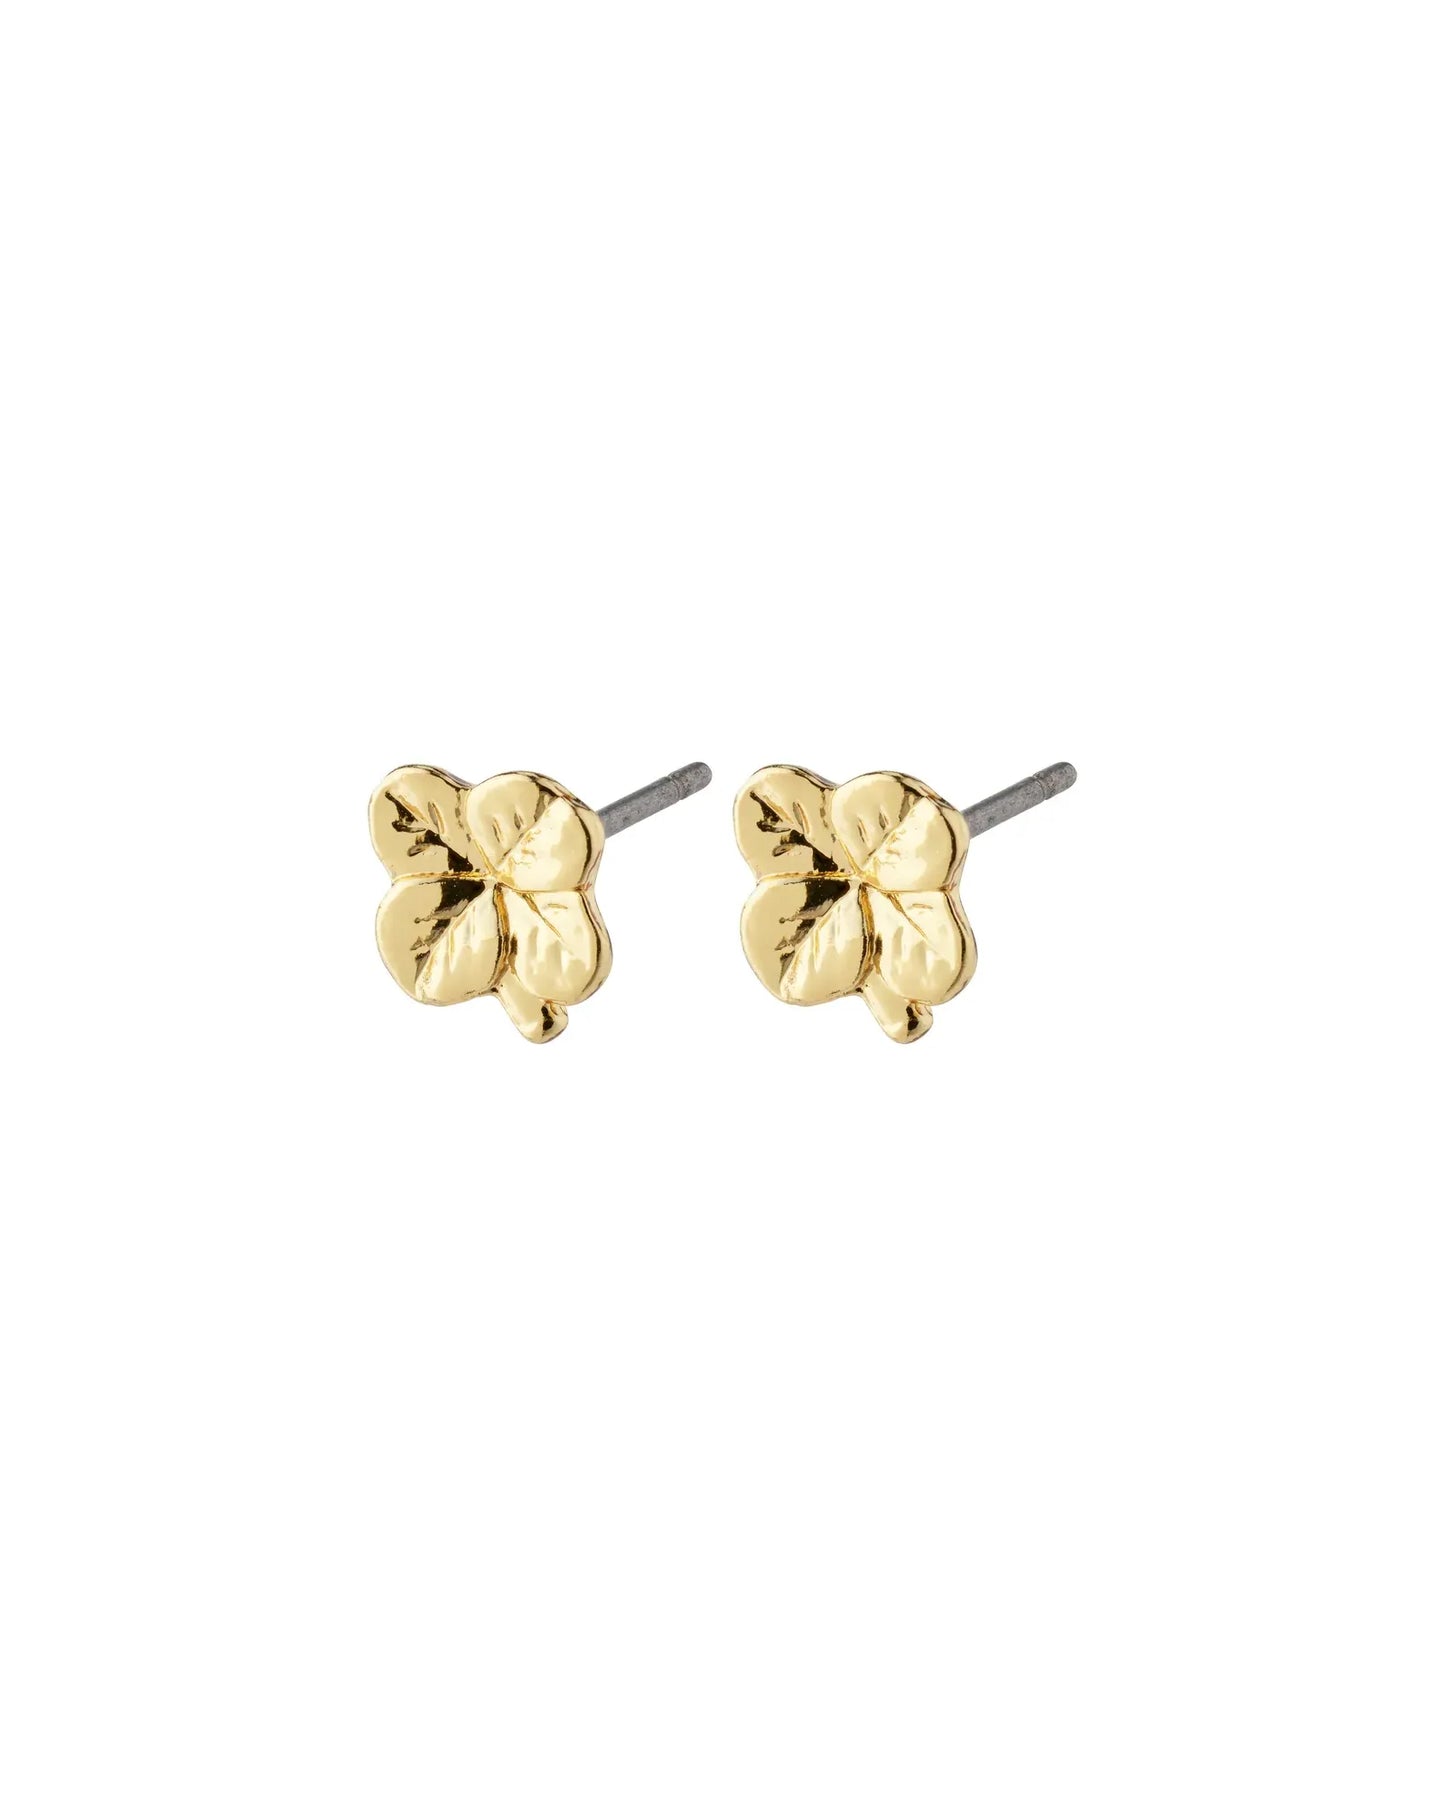 OCTAVIA Recycled Clover Earrings - Gold Plated